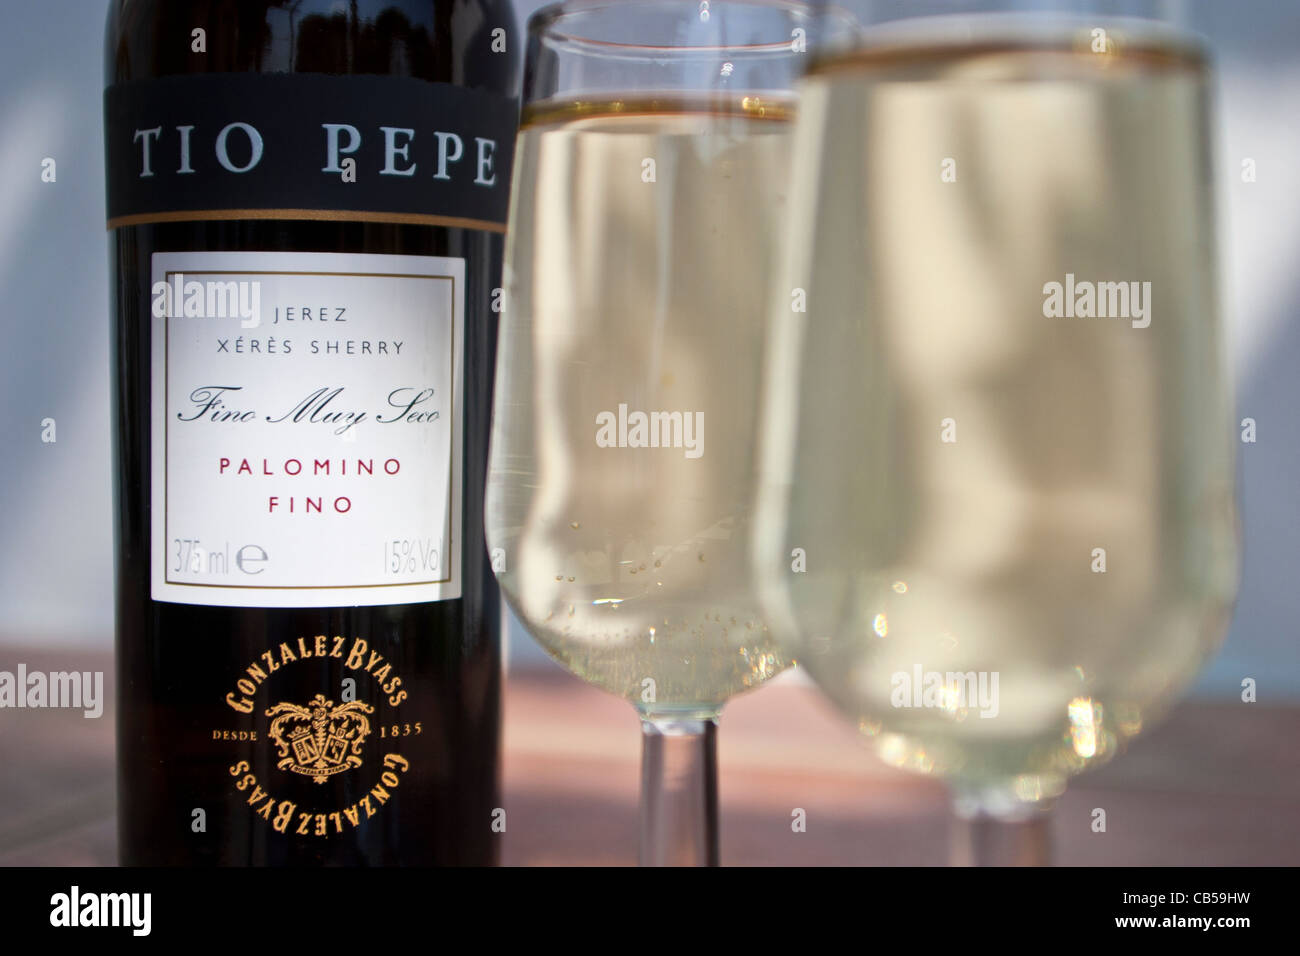 Tio Pepe sherry bottle and sherry glasses Stock Photo - Alamy